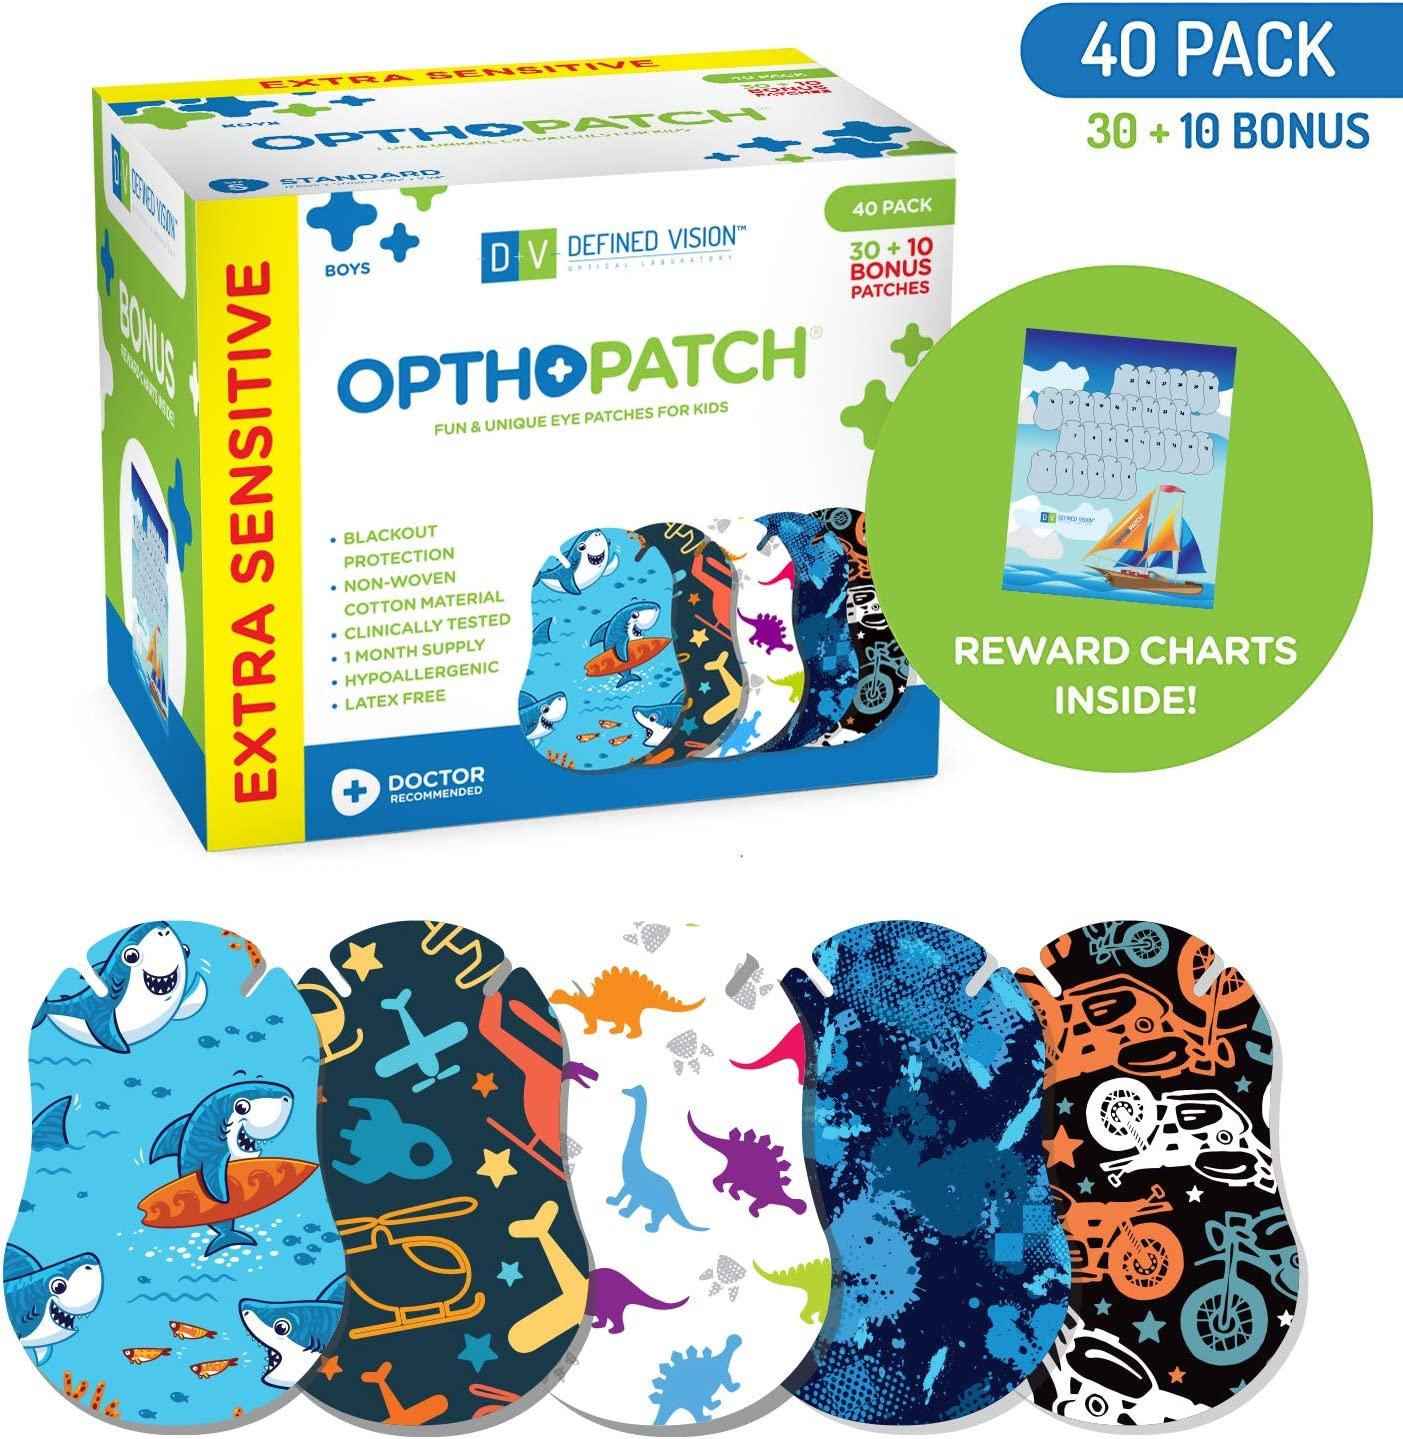 Optify Vision Therapy Adhesive Eye Patch for Kids - Girls Hypoallergenic  Non-Latex Children's Amblyopia Non-Woven Cotton Patch with 2 Poster Charts